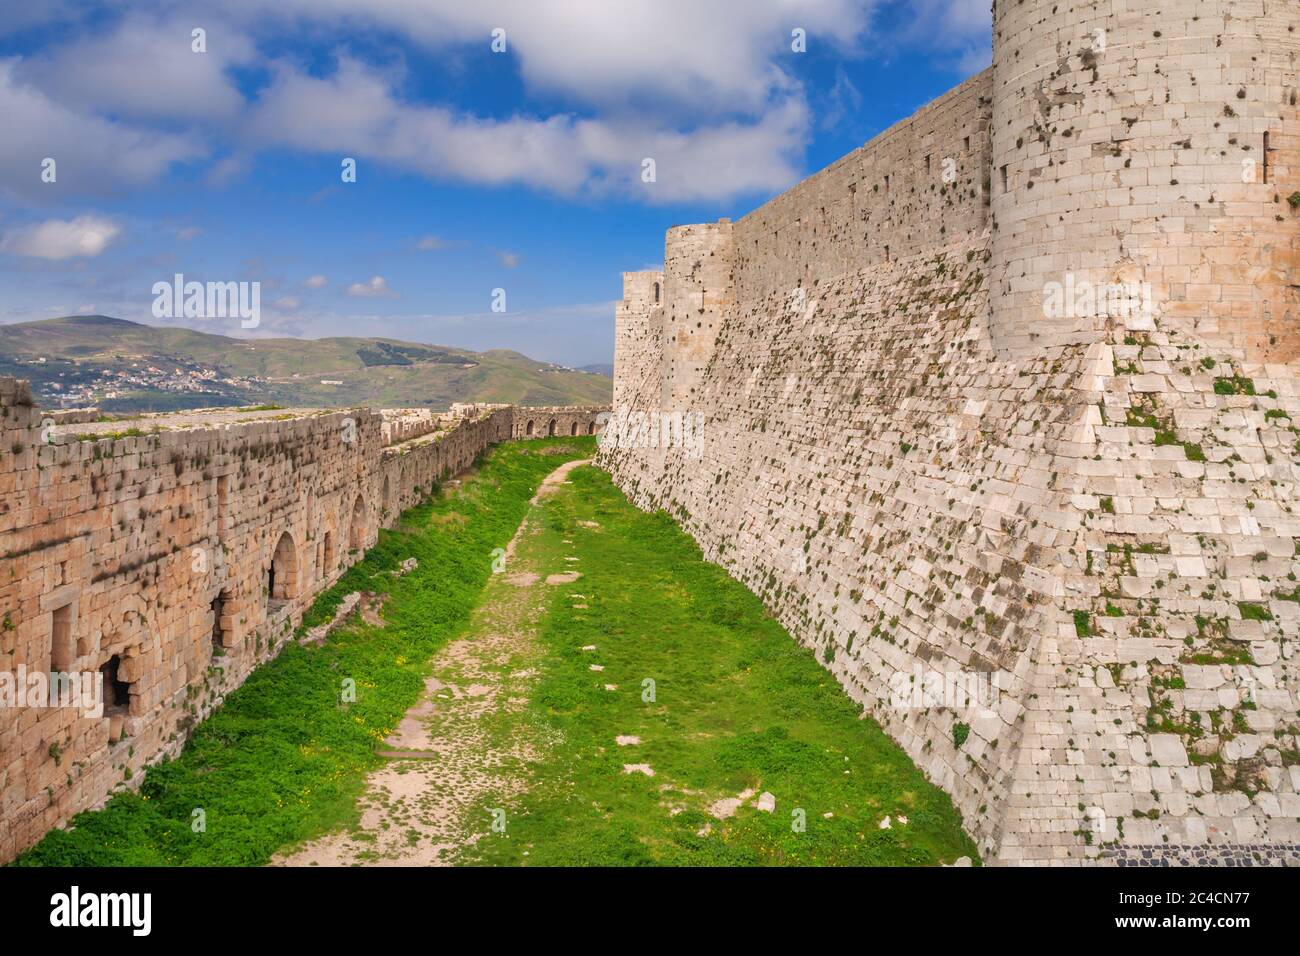 Crusaders castle Krak des Chevaliers, Castle of the Knights, Qalaat al Hosn, (1140-1260), Syria Stock Photo